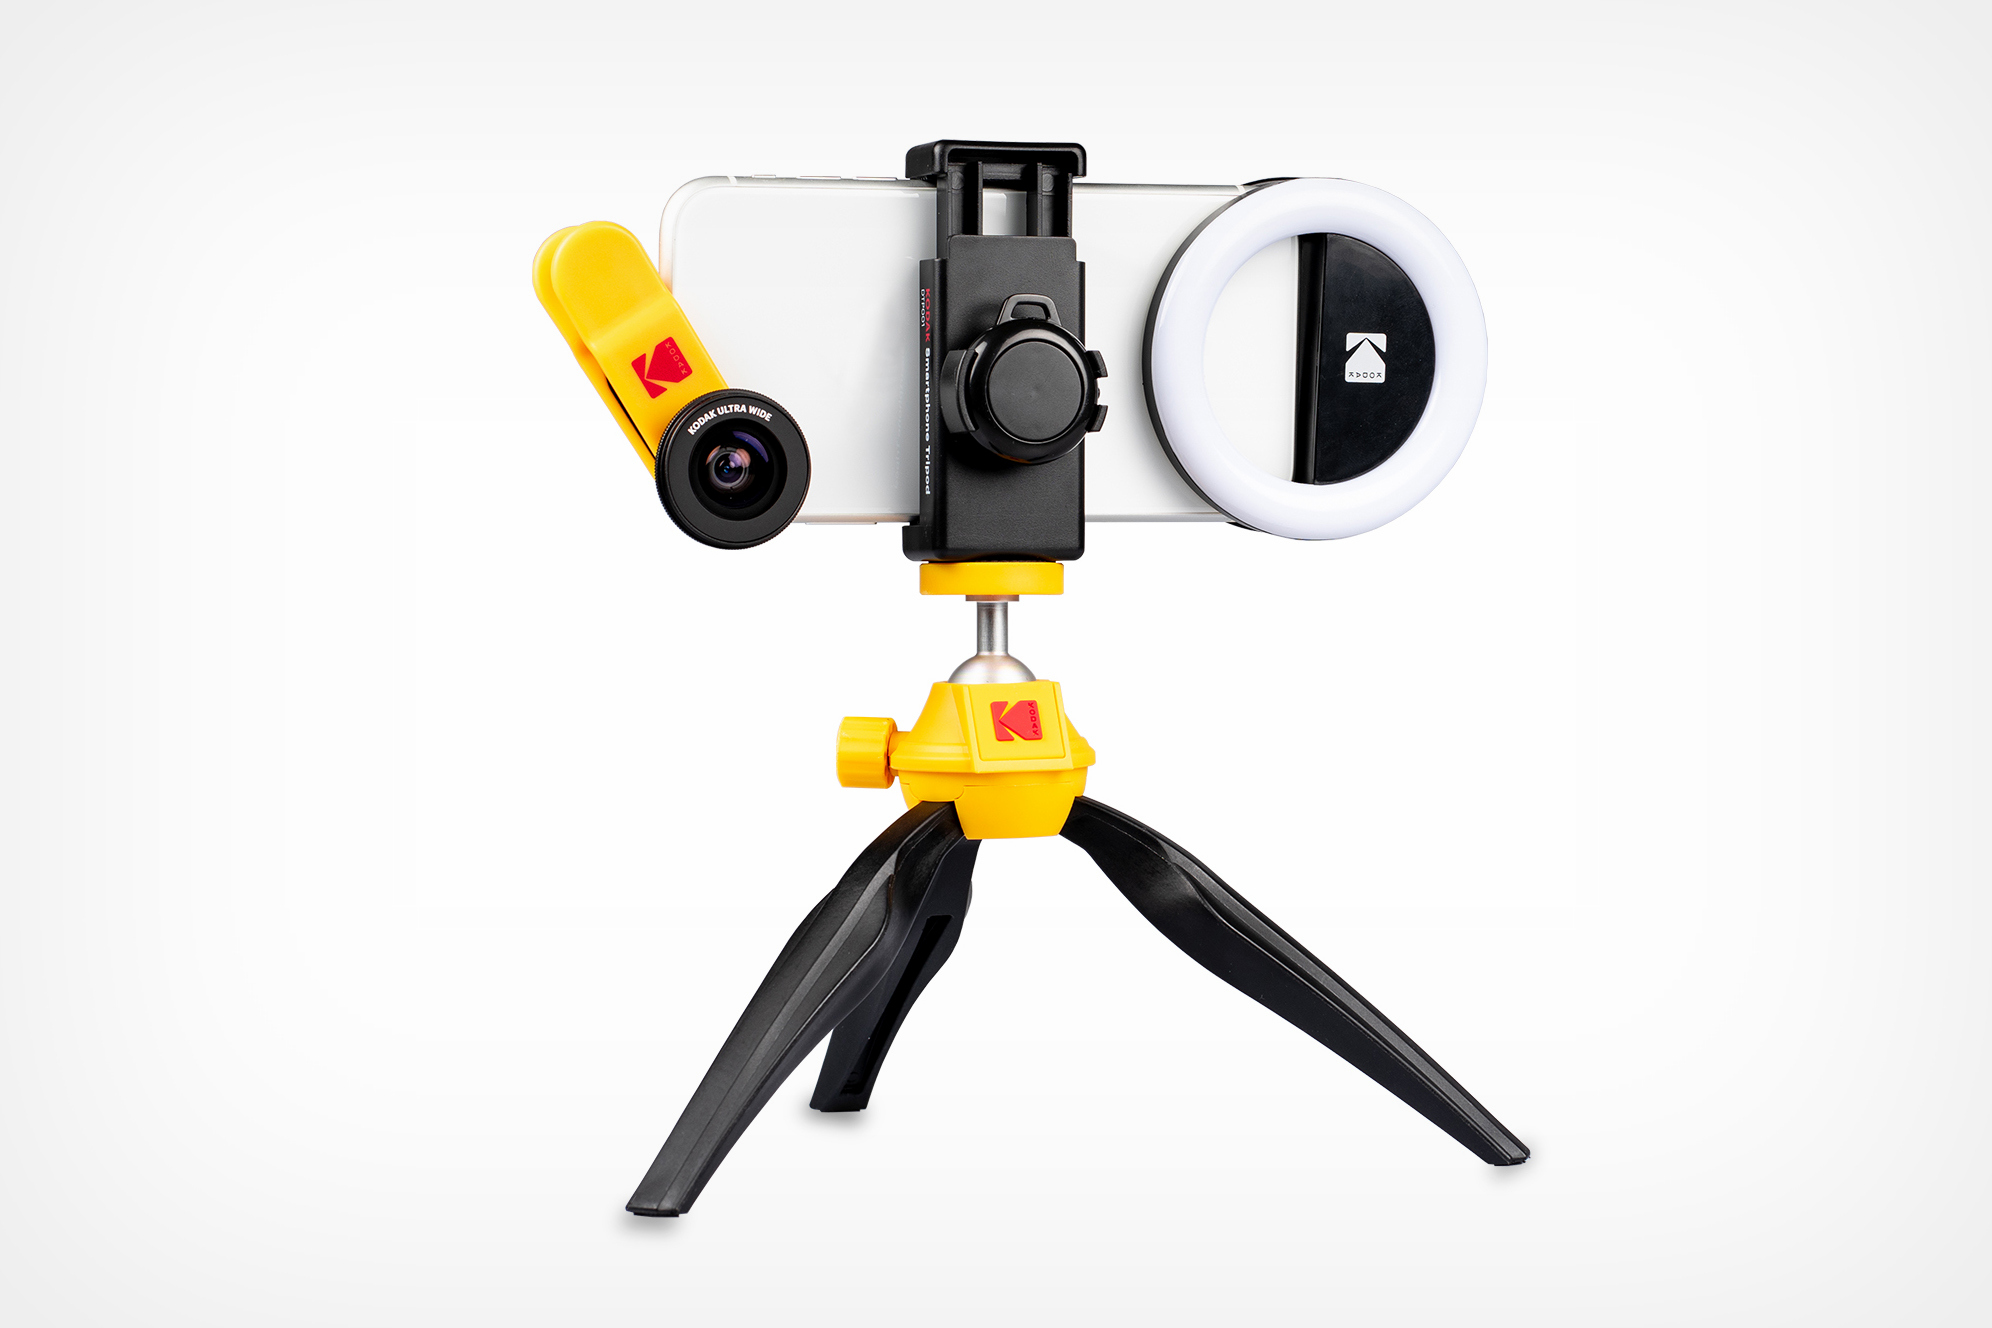 Klooster Bediende Verkoper Kodak's making a grand comeback with this comprehensive smartphone  photography kit! - Yanko Design